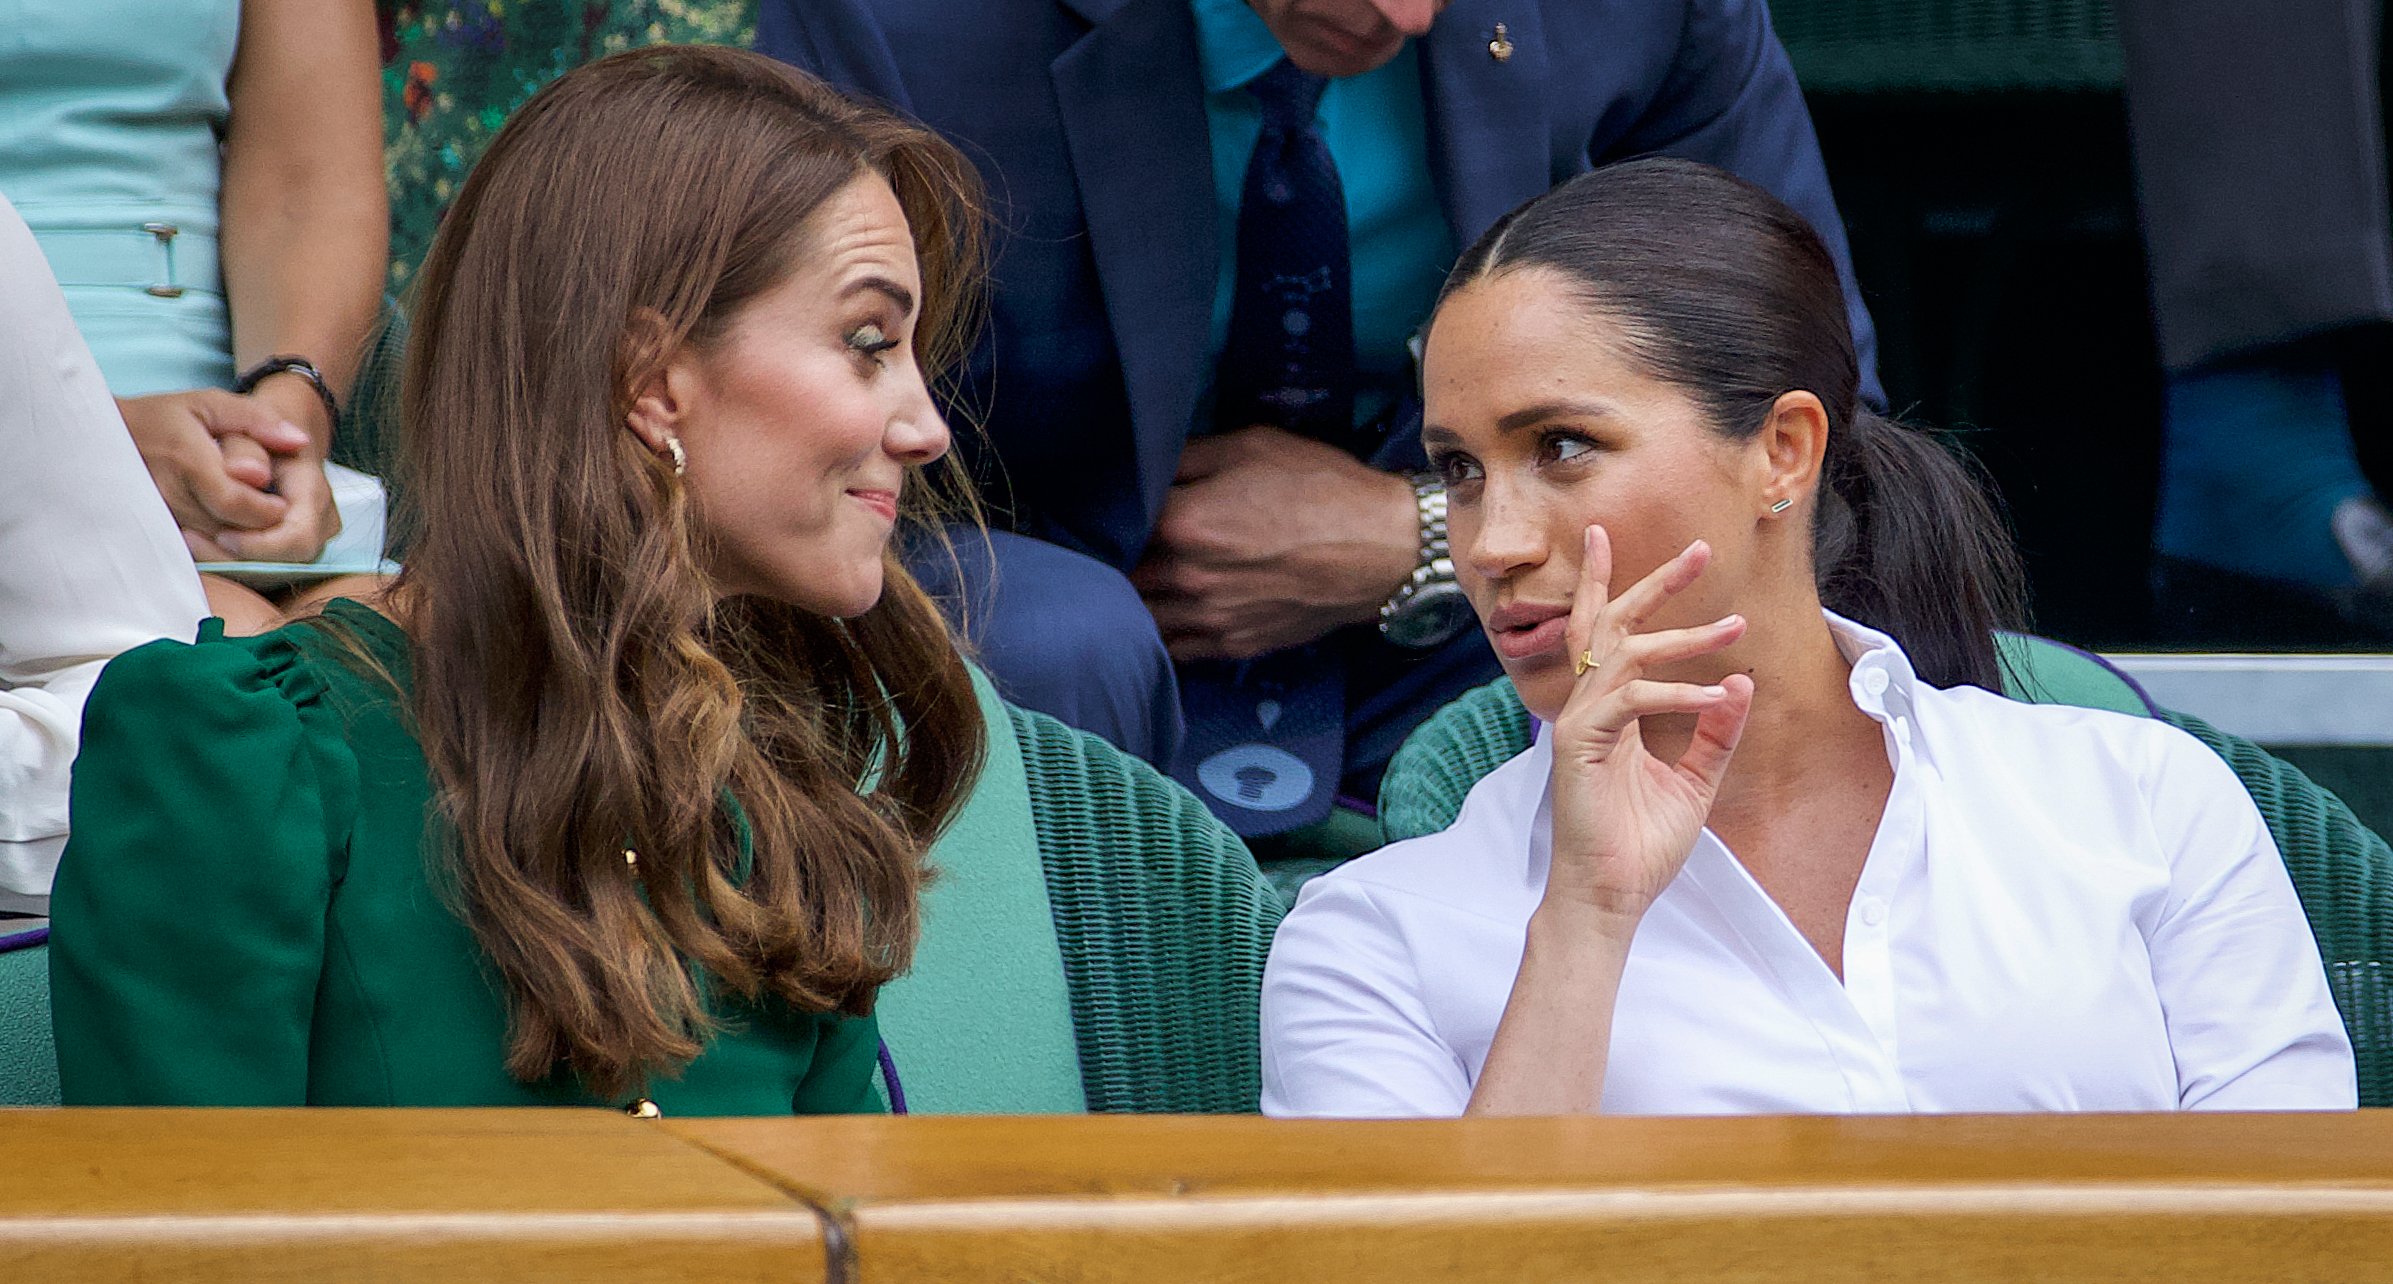 Kate Middleton conversing with Meghan Markle in the Royal Box on Centre Court during the Wimbledon Lawn Tennis Championships at the All England Lawn Tennis and Croquet Club at Wimbledon on July 13, 2019 in London, England. | Source: Getty Images